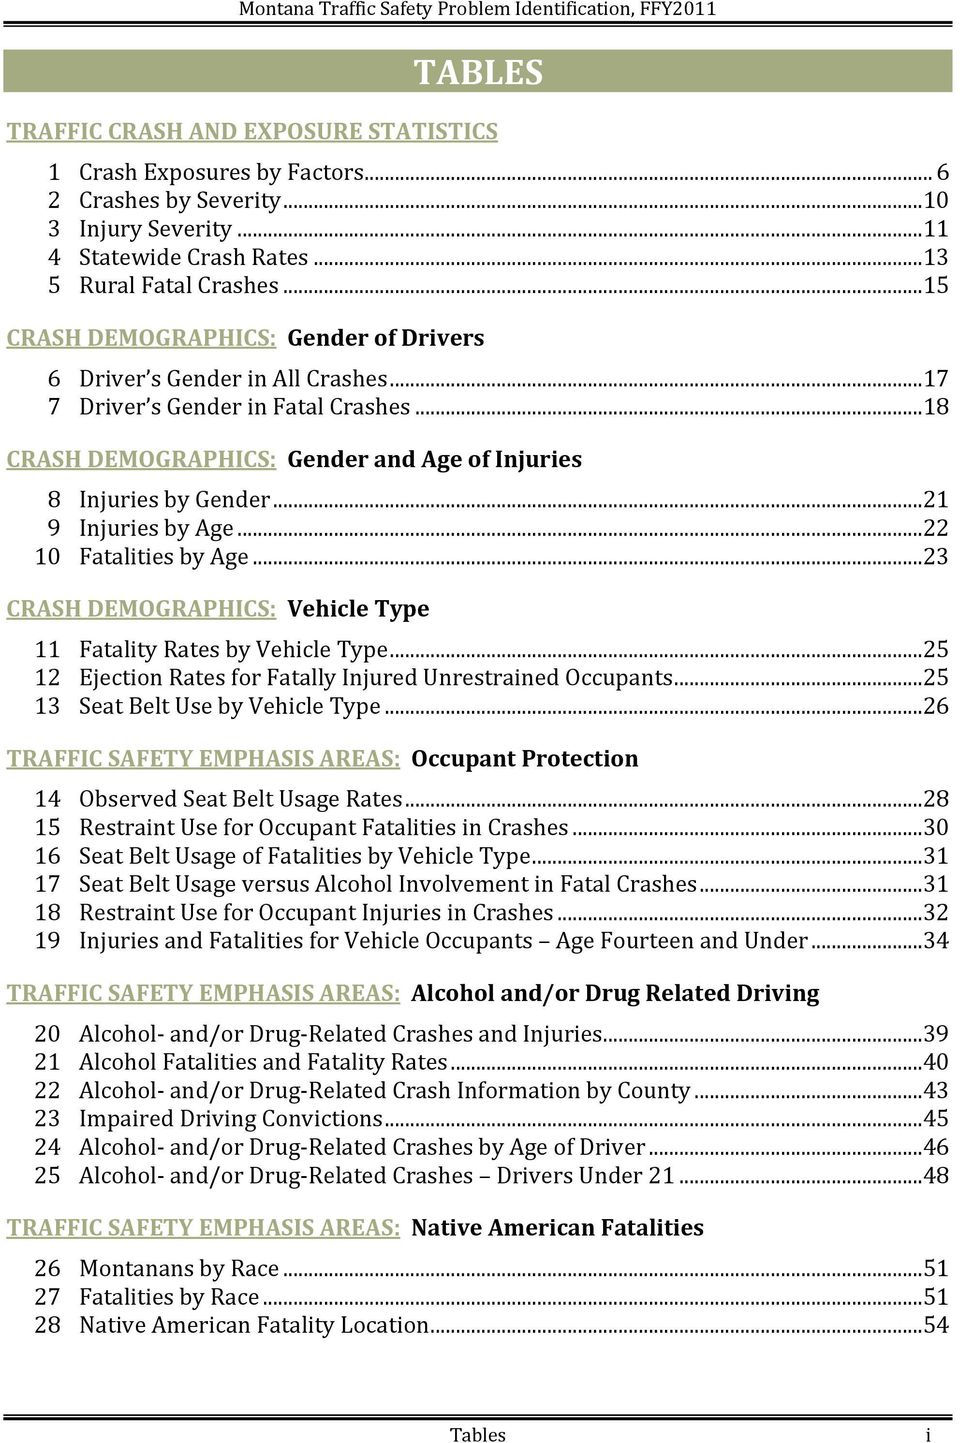 ..21 9 Injuries by Age...22 10 Fatalities by Age...23 CRASH DEMOGRAPHICS: Vehicle Type 11 Fatality Rates by Vehicle Type...25 12 Ejection Rates for Fatally Injured Unrestrained Occupants.